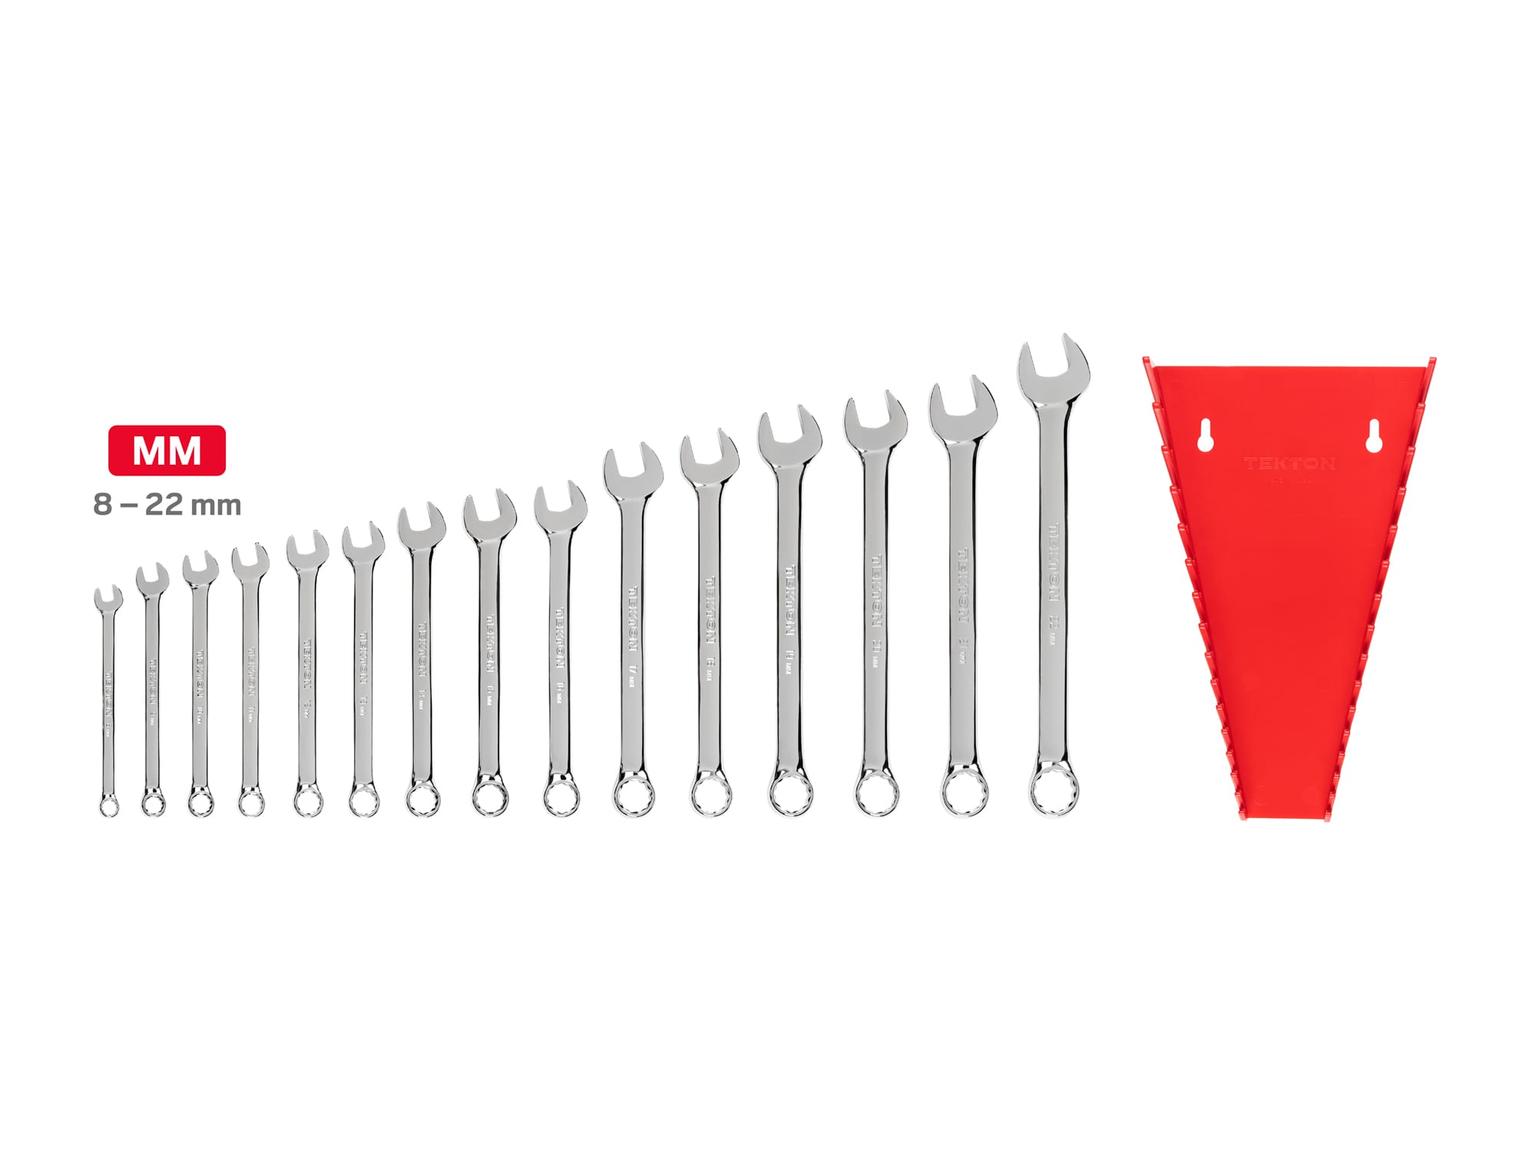 TEKTON WCB92207-T Combination Wrench Set with Rack, 15-Piece (8 - 22 mm)